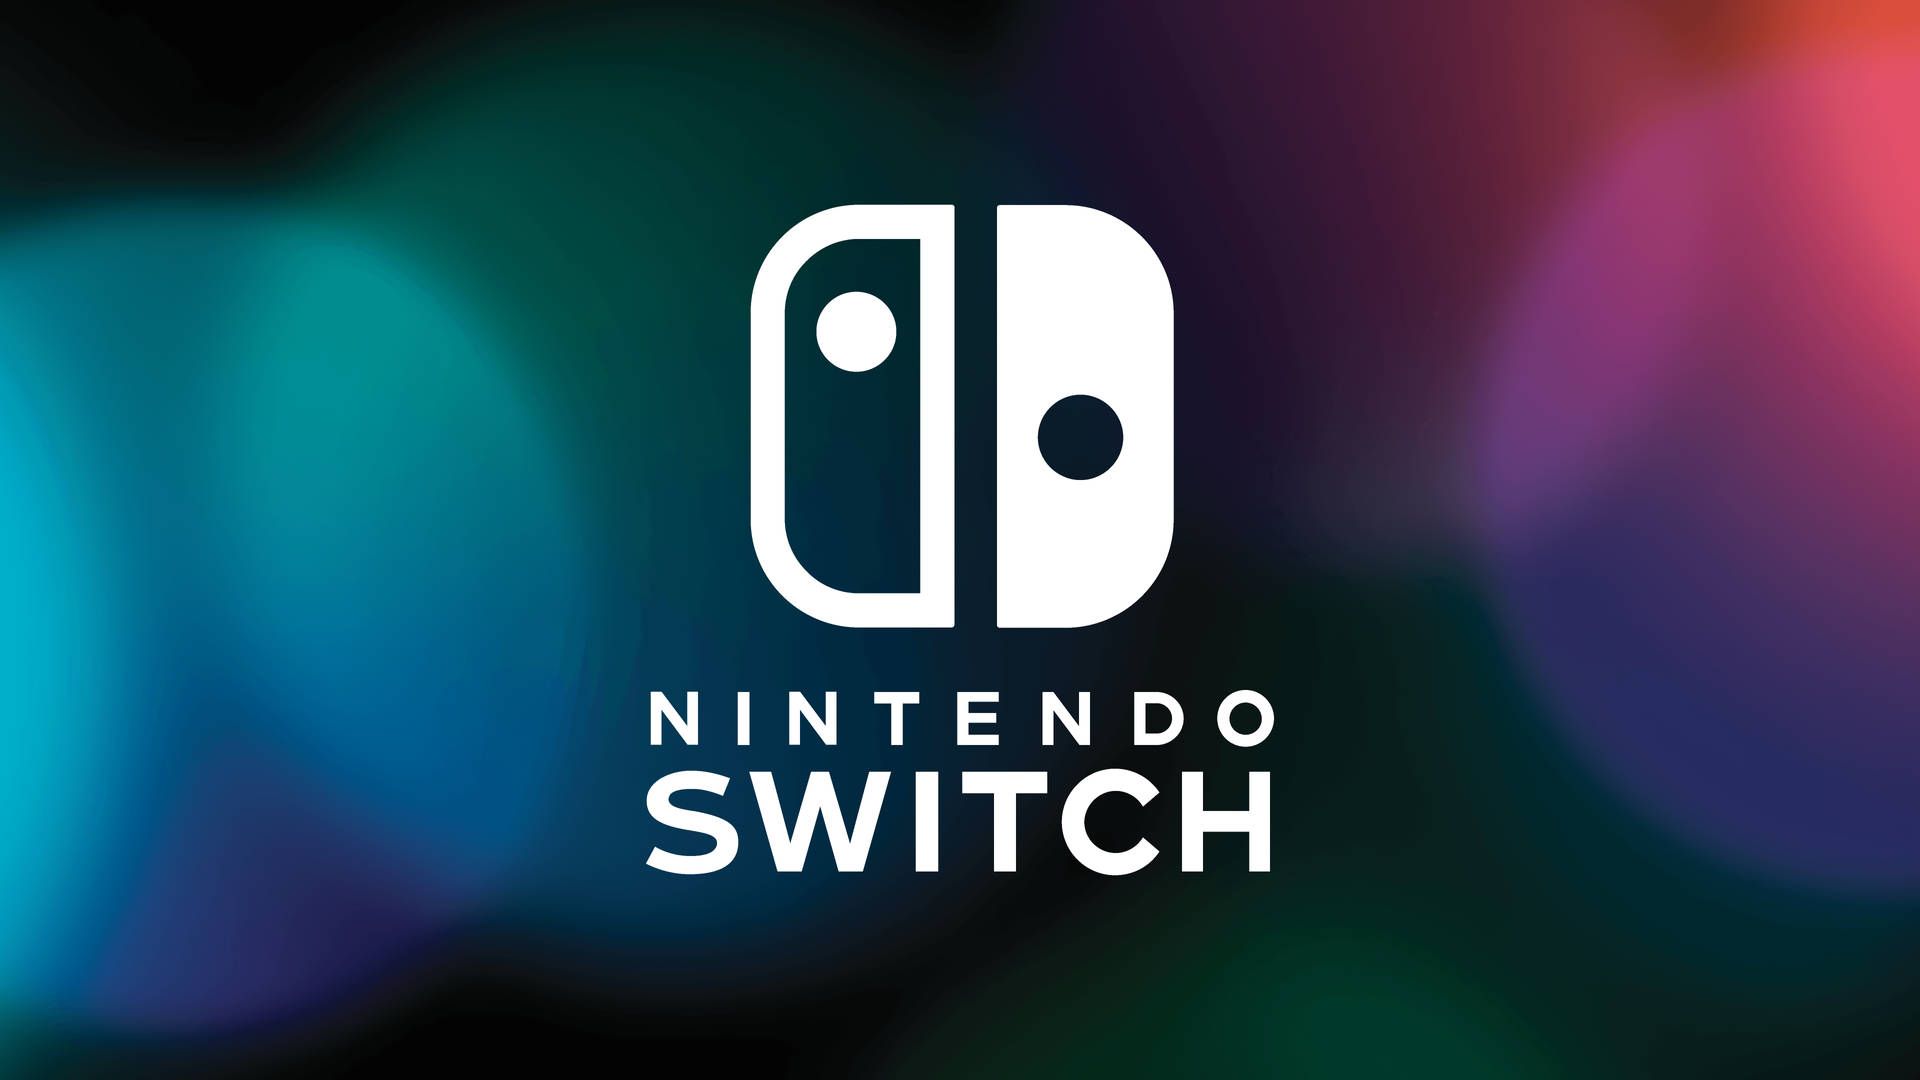 Nintendo Switch Pictures